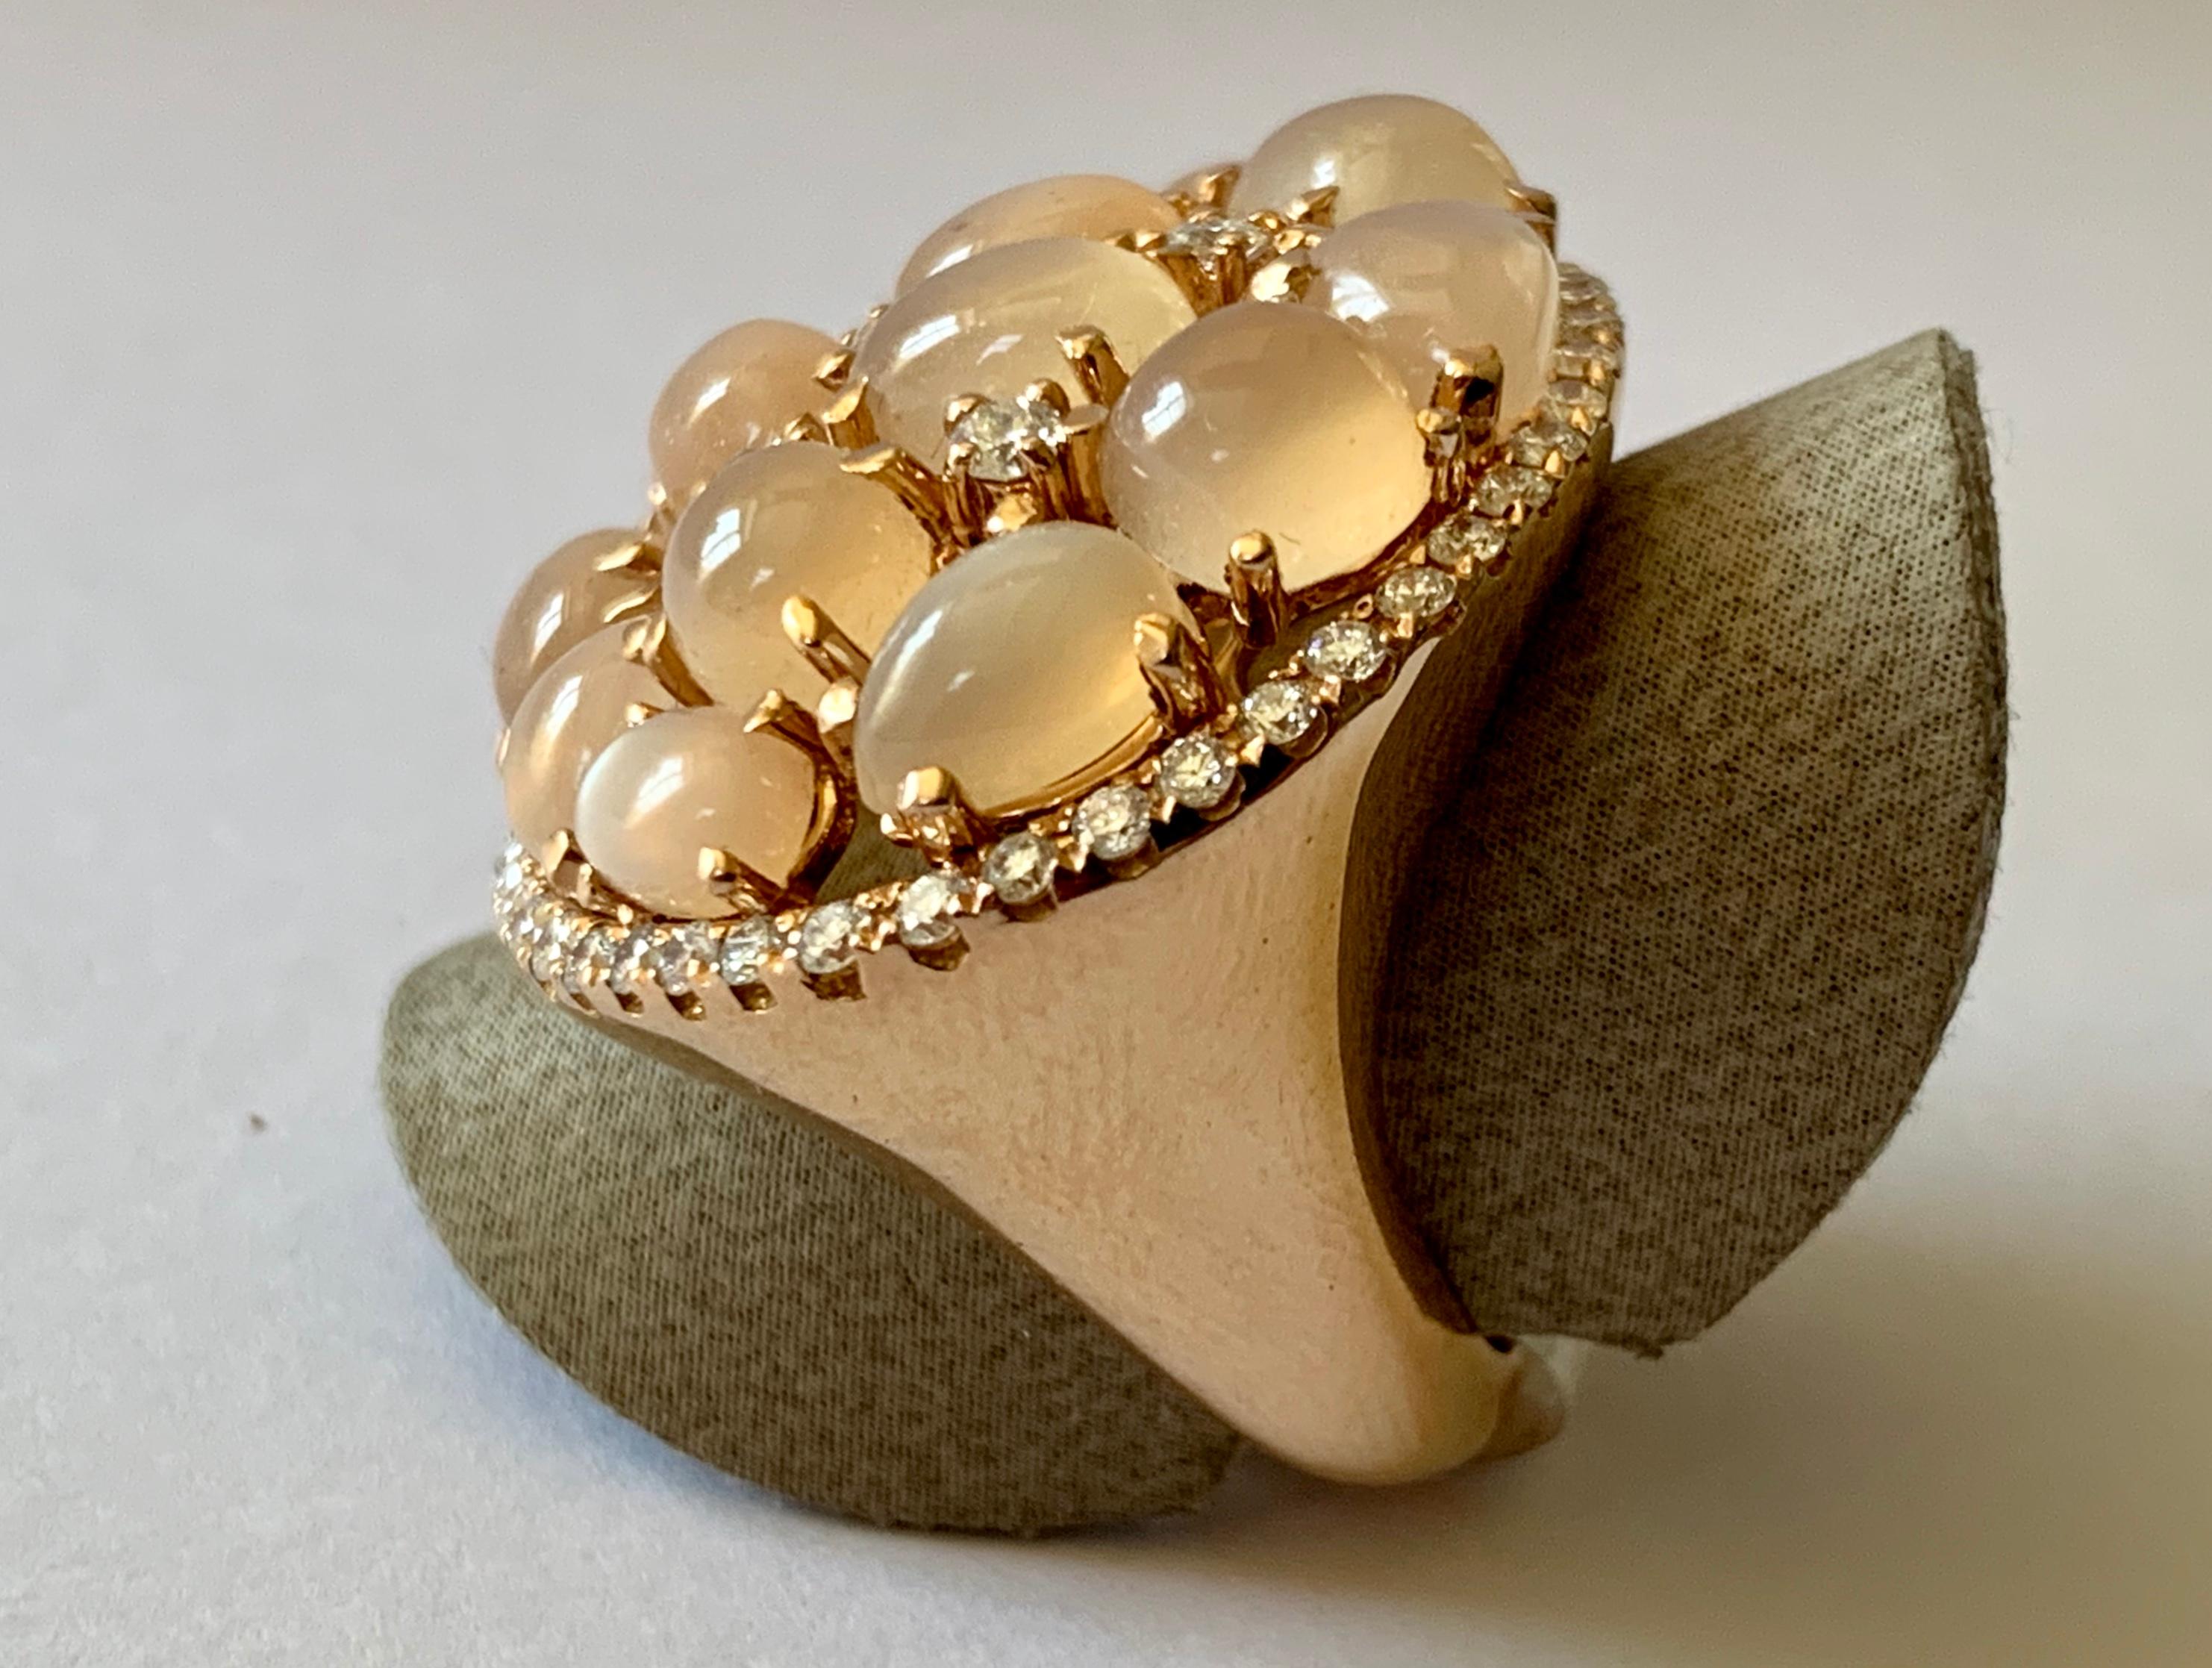 Extravagant 18 Karat Rose Gold Cocktail Ring with Moonstones and Diamonds For Sale 1